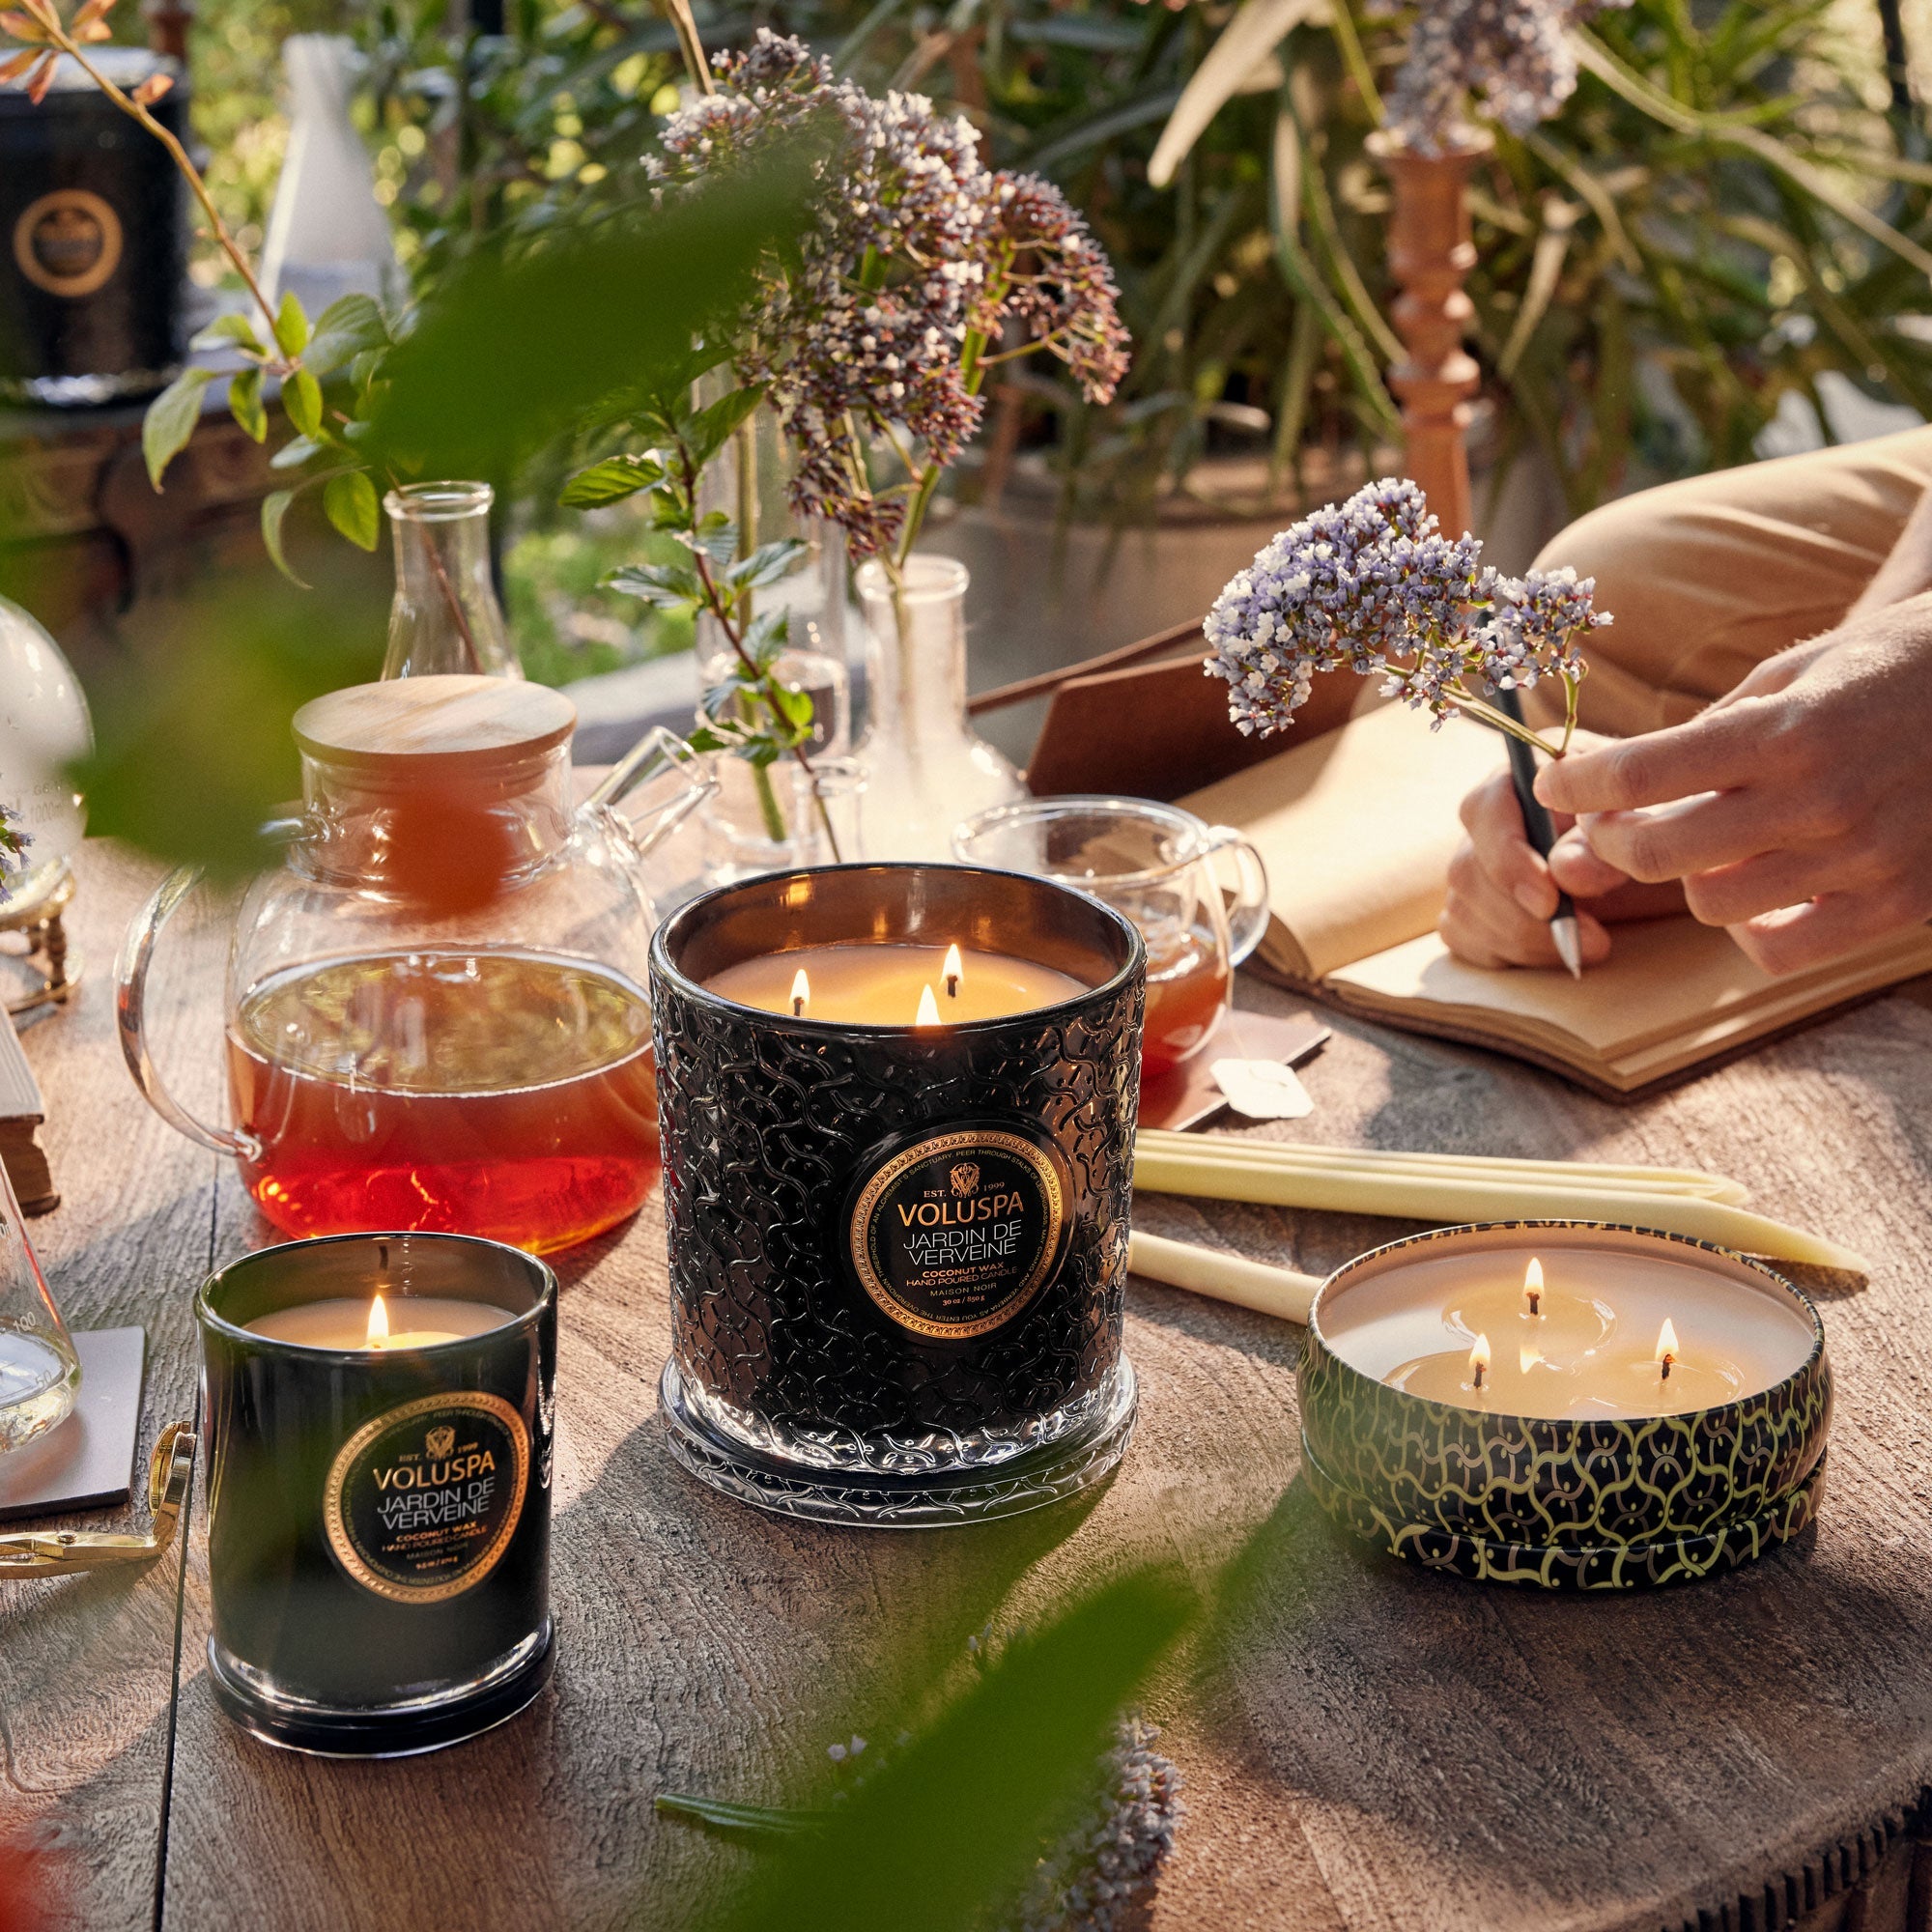 Island Breeze – A Glowing Trend Handcrafted Candles